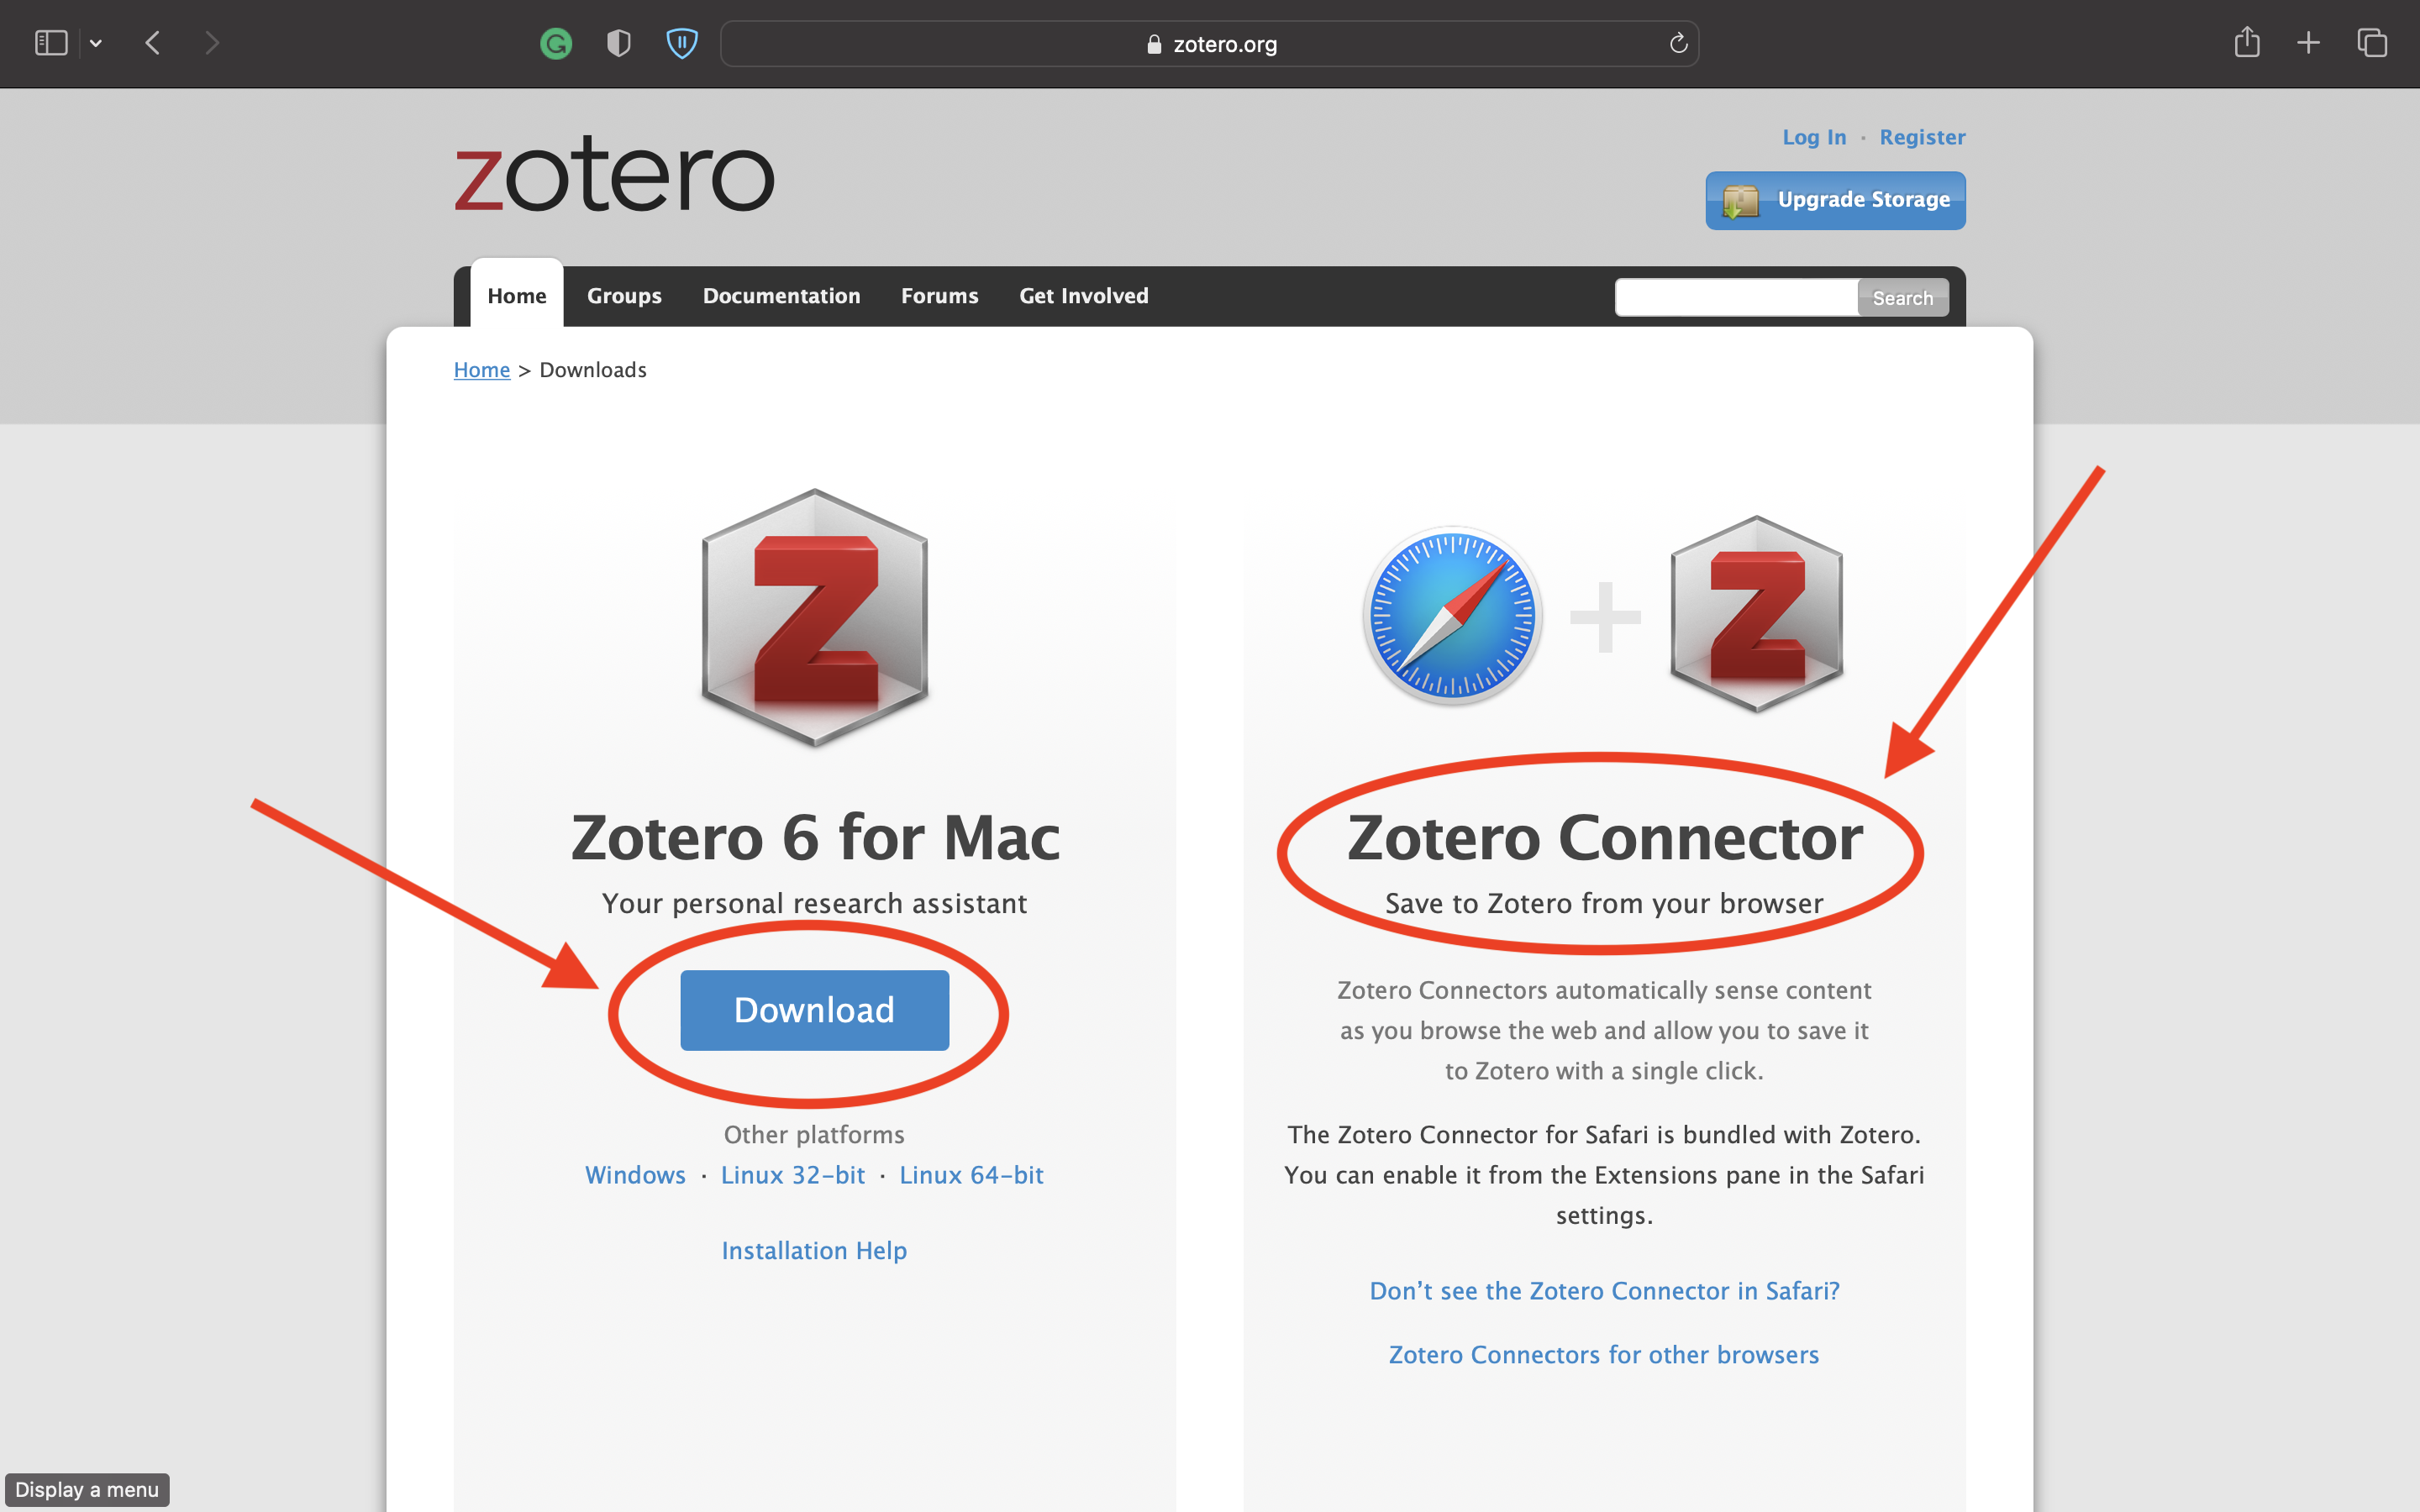 Zotero home page after pressing the Download button on the previous page. Two light grey panels alongside each other. The panel to the left reads "Zotero 6 for Mac", with a light blue Download button below. The panel to the right reads "Zotero Connector" and describes the need for downloading a connector to save materials from you browser directly into Zotero.